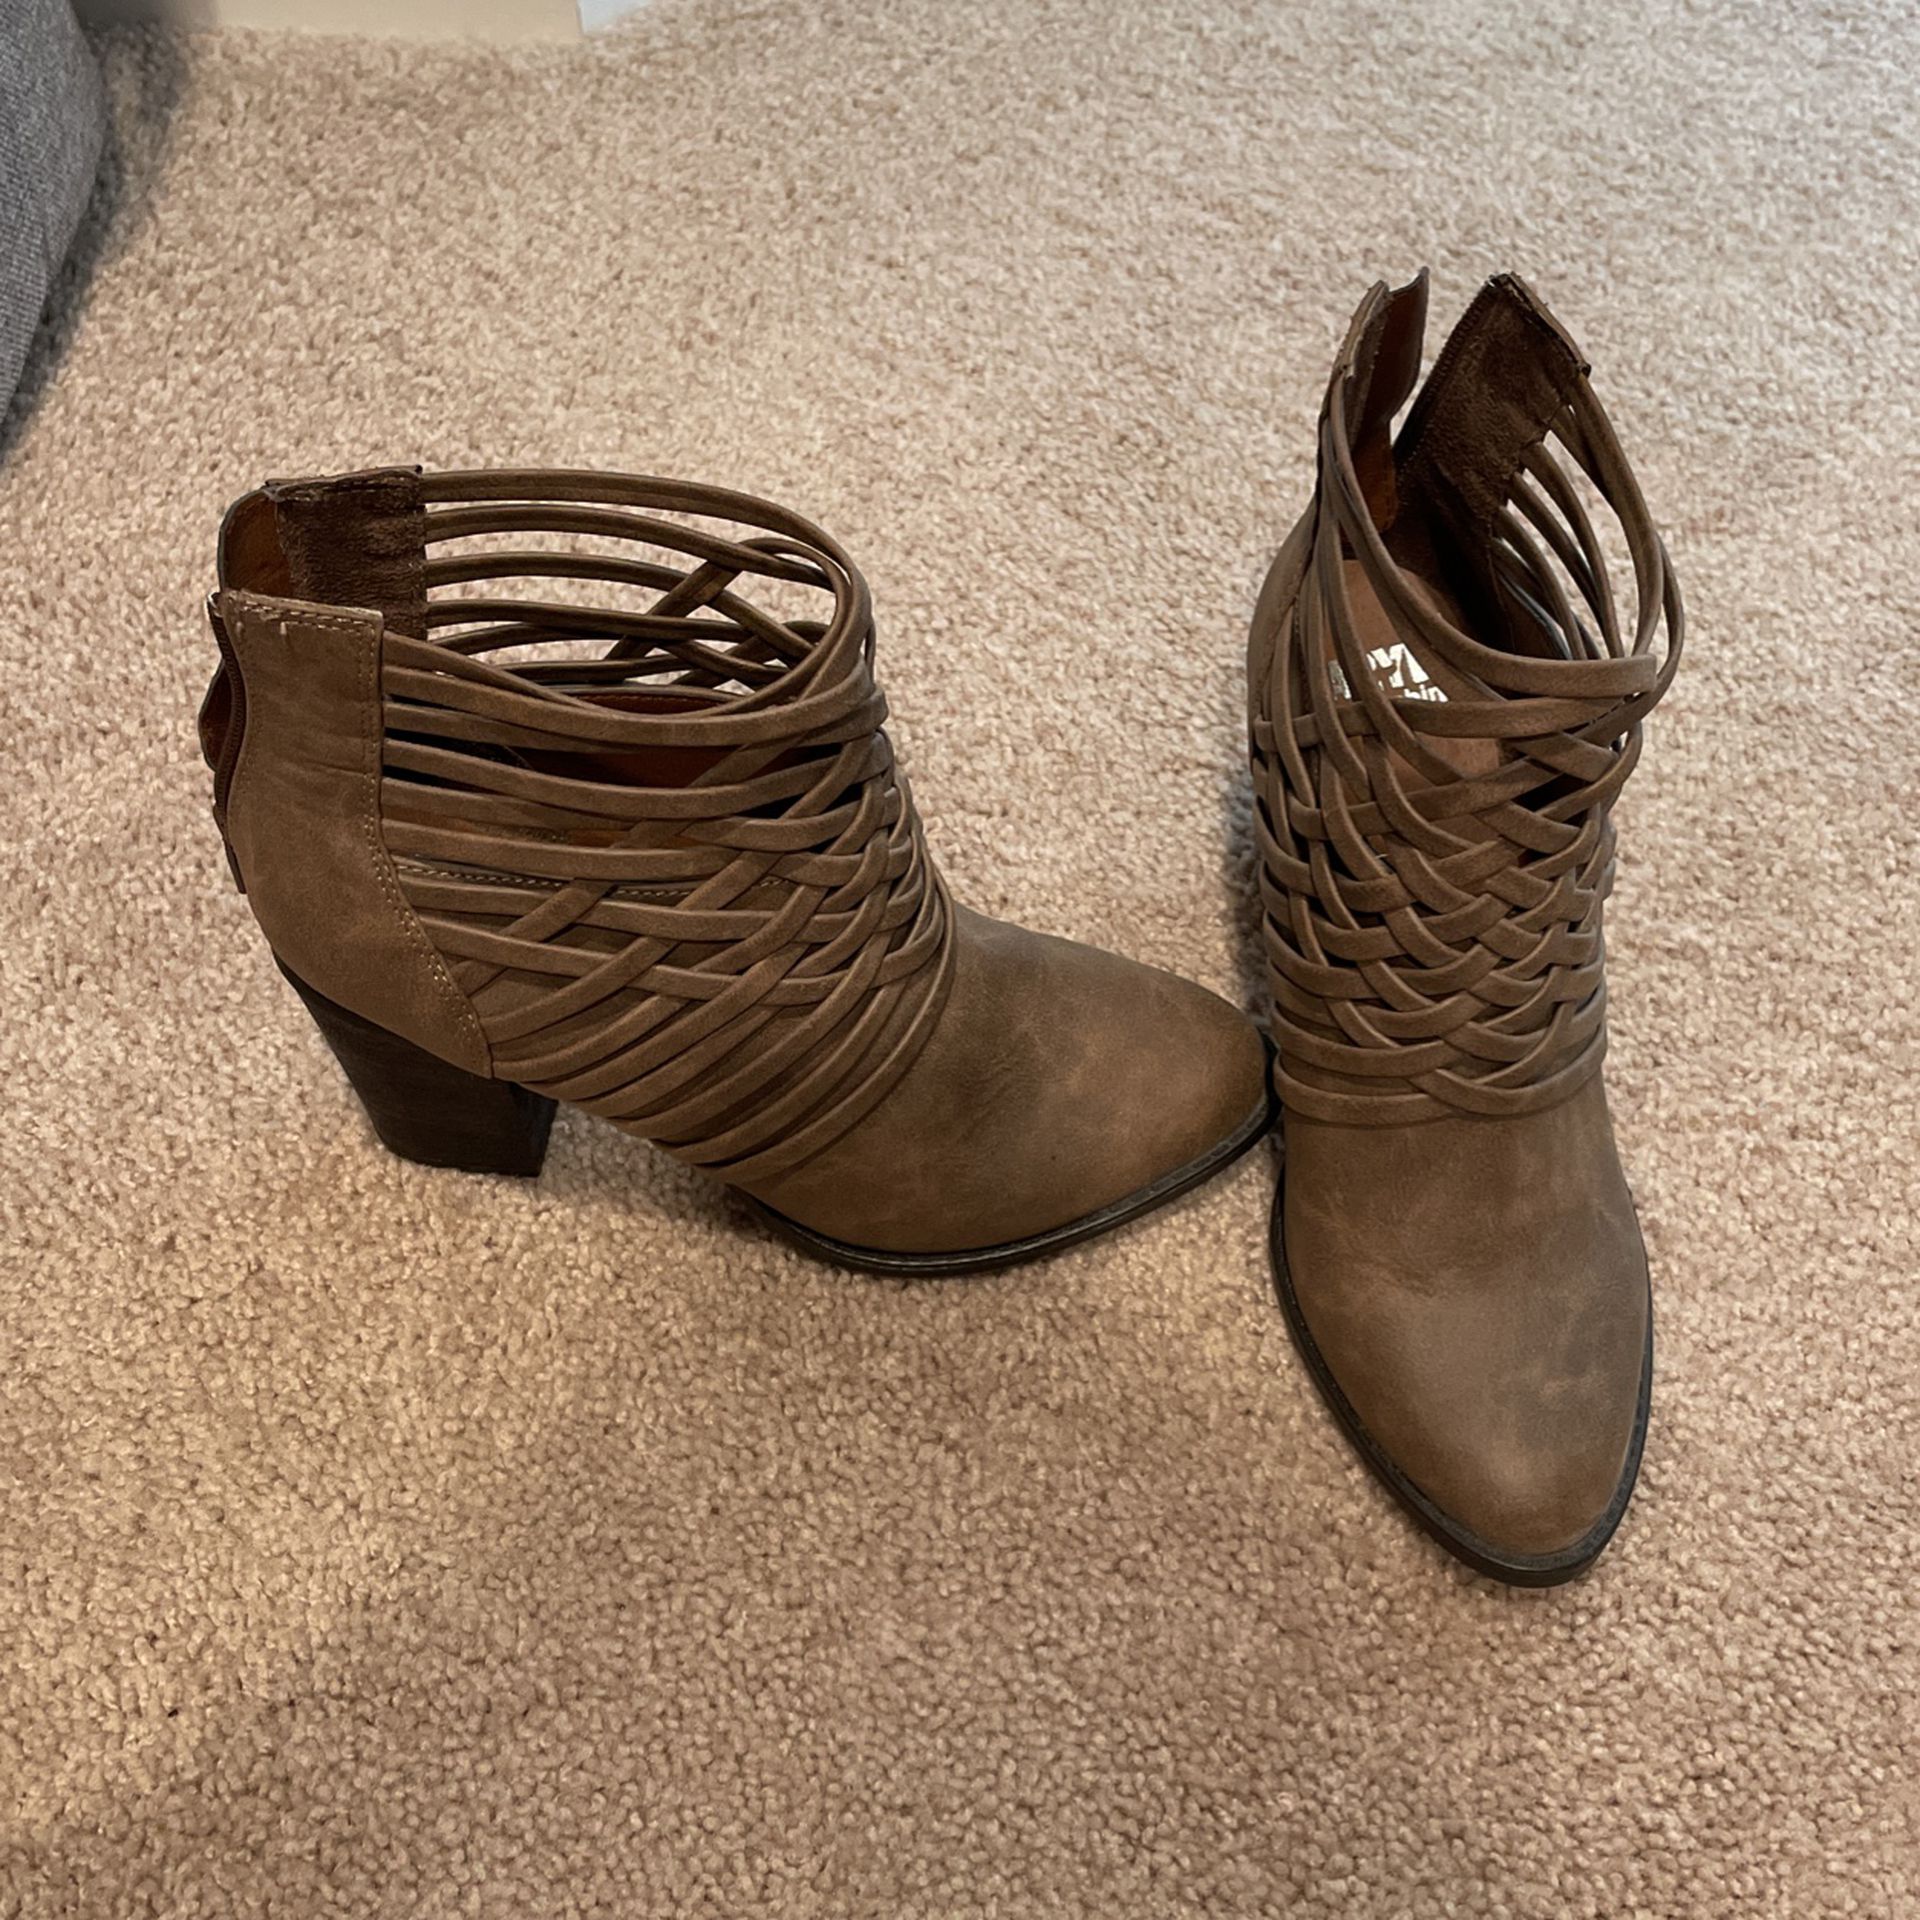 Farylrobin Booties, Size 8.5,  Brown, Zip Up In Back